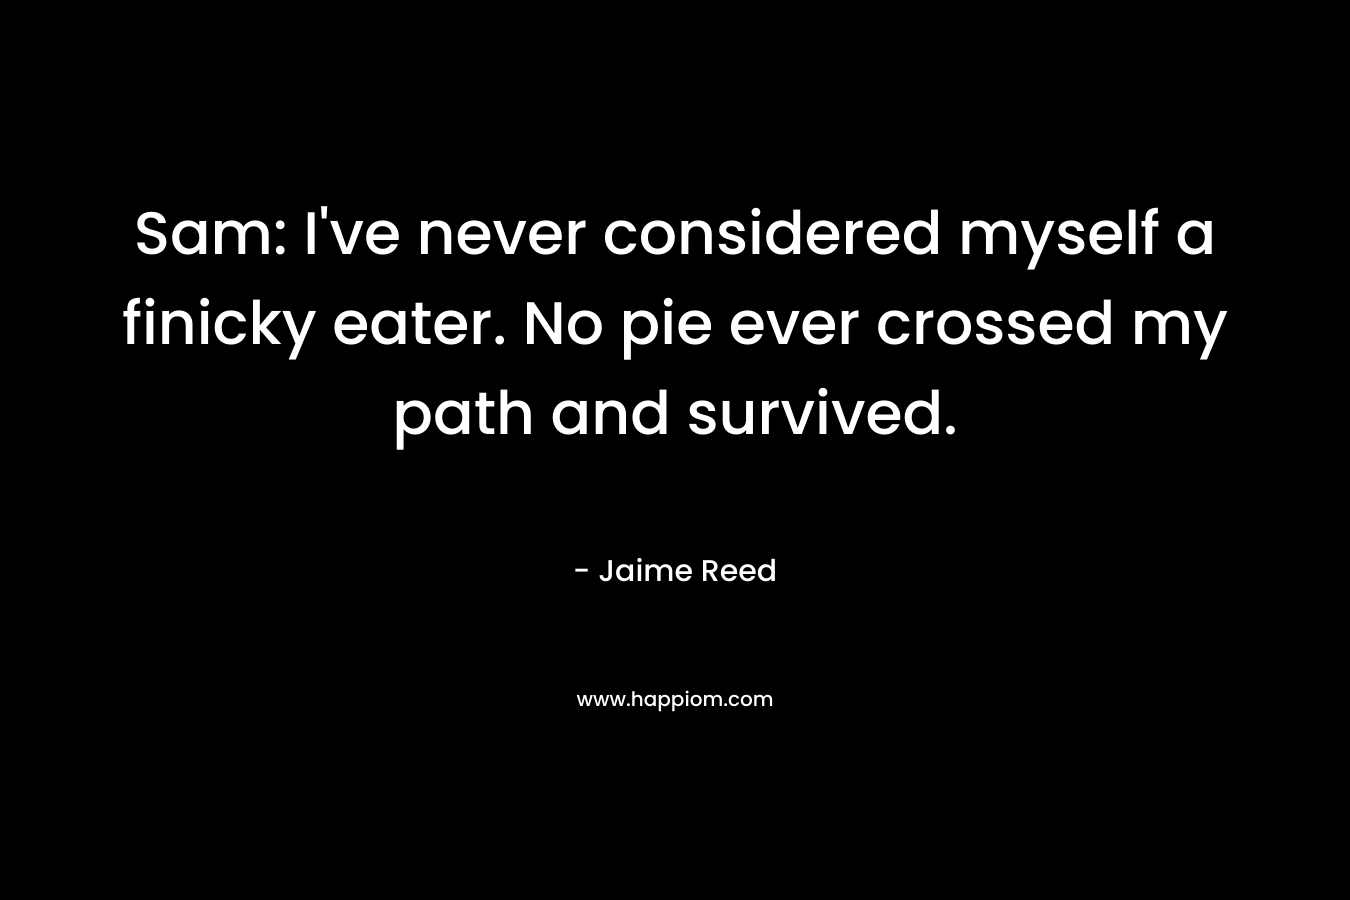 Sam: I’ve never considered myself a finicky eater. No pie ever crossed my path and survived. – Jaime Reed